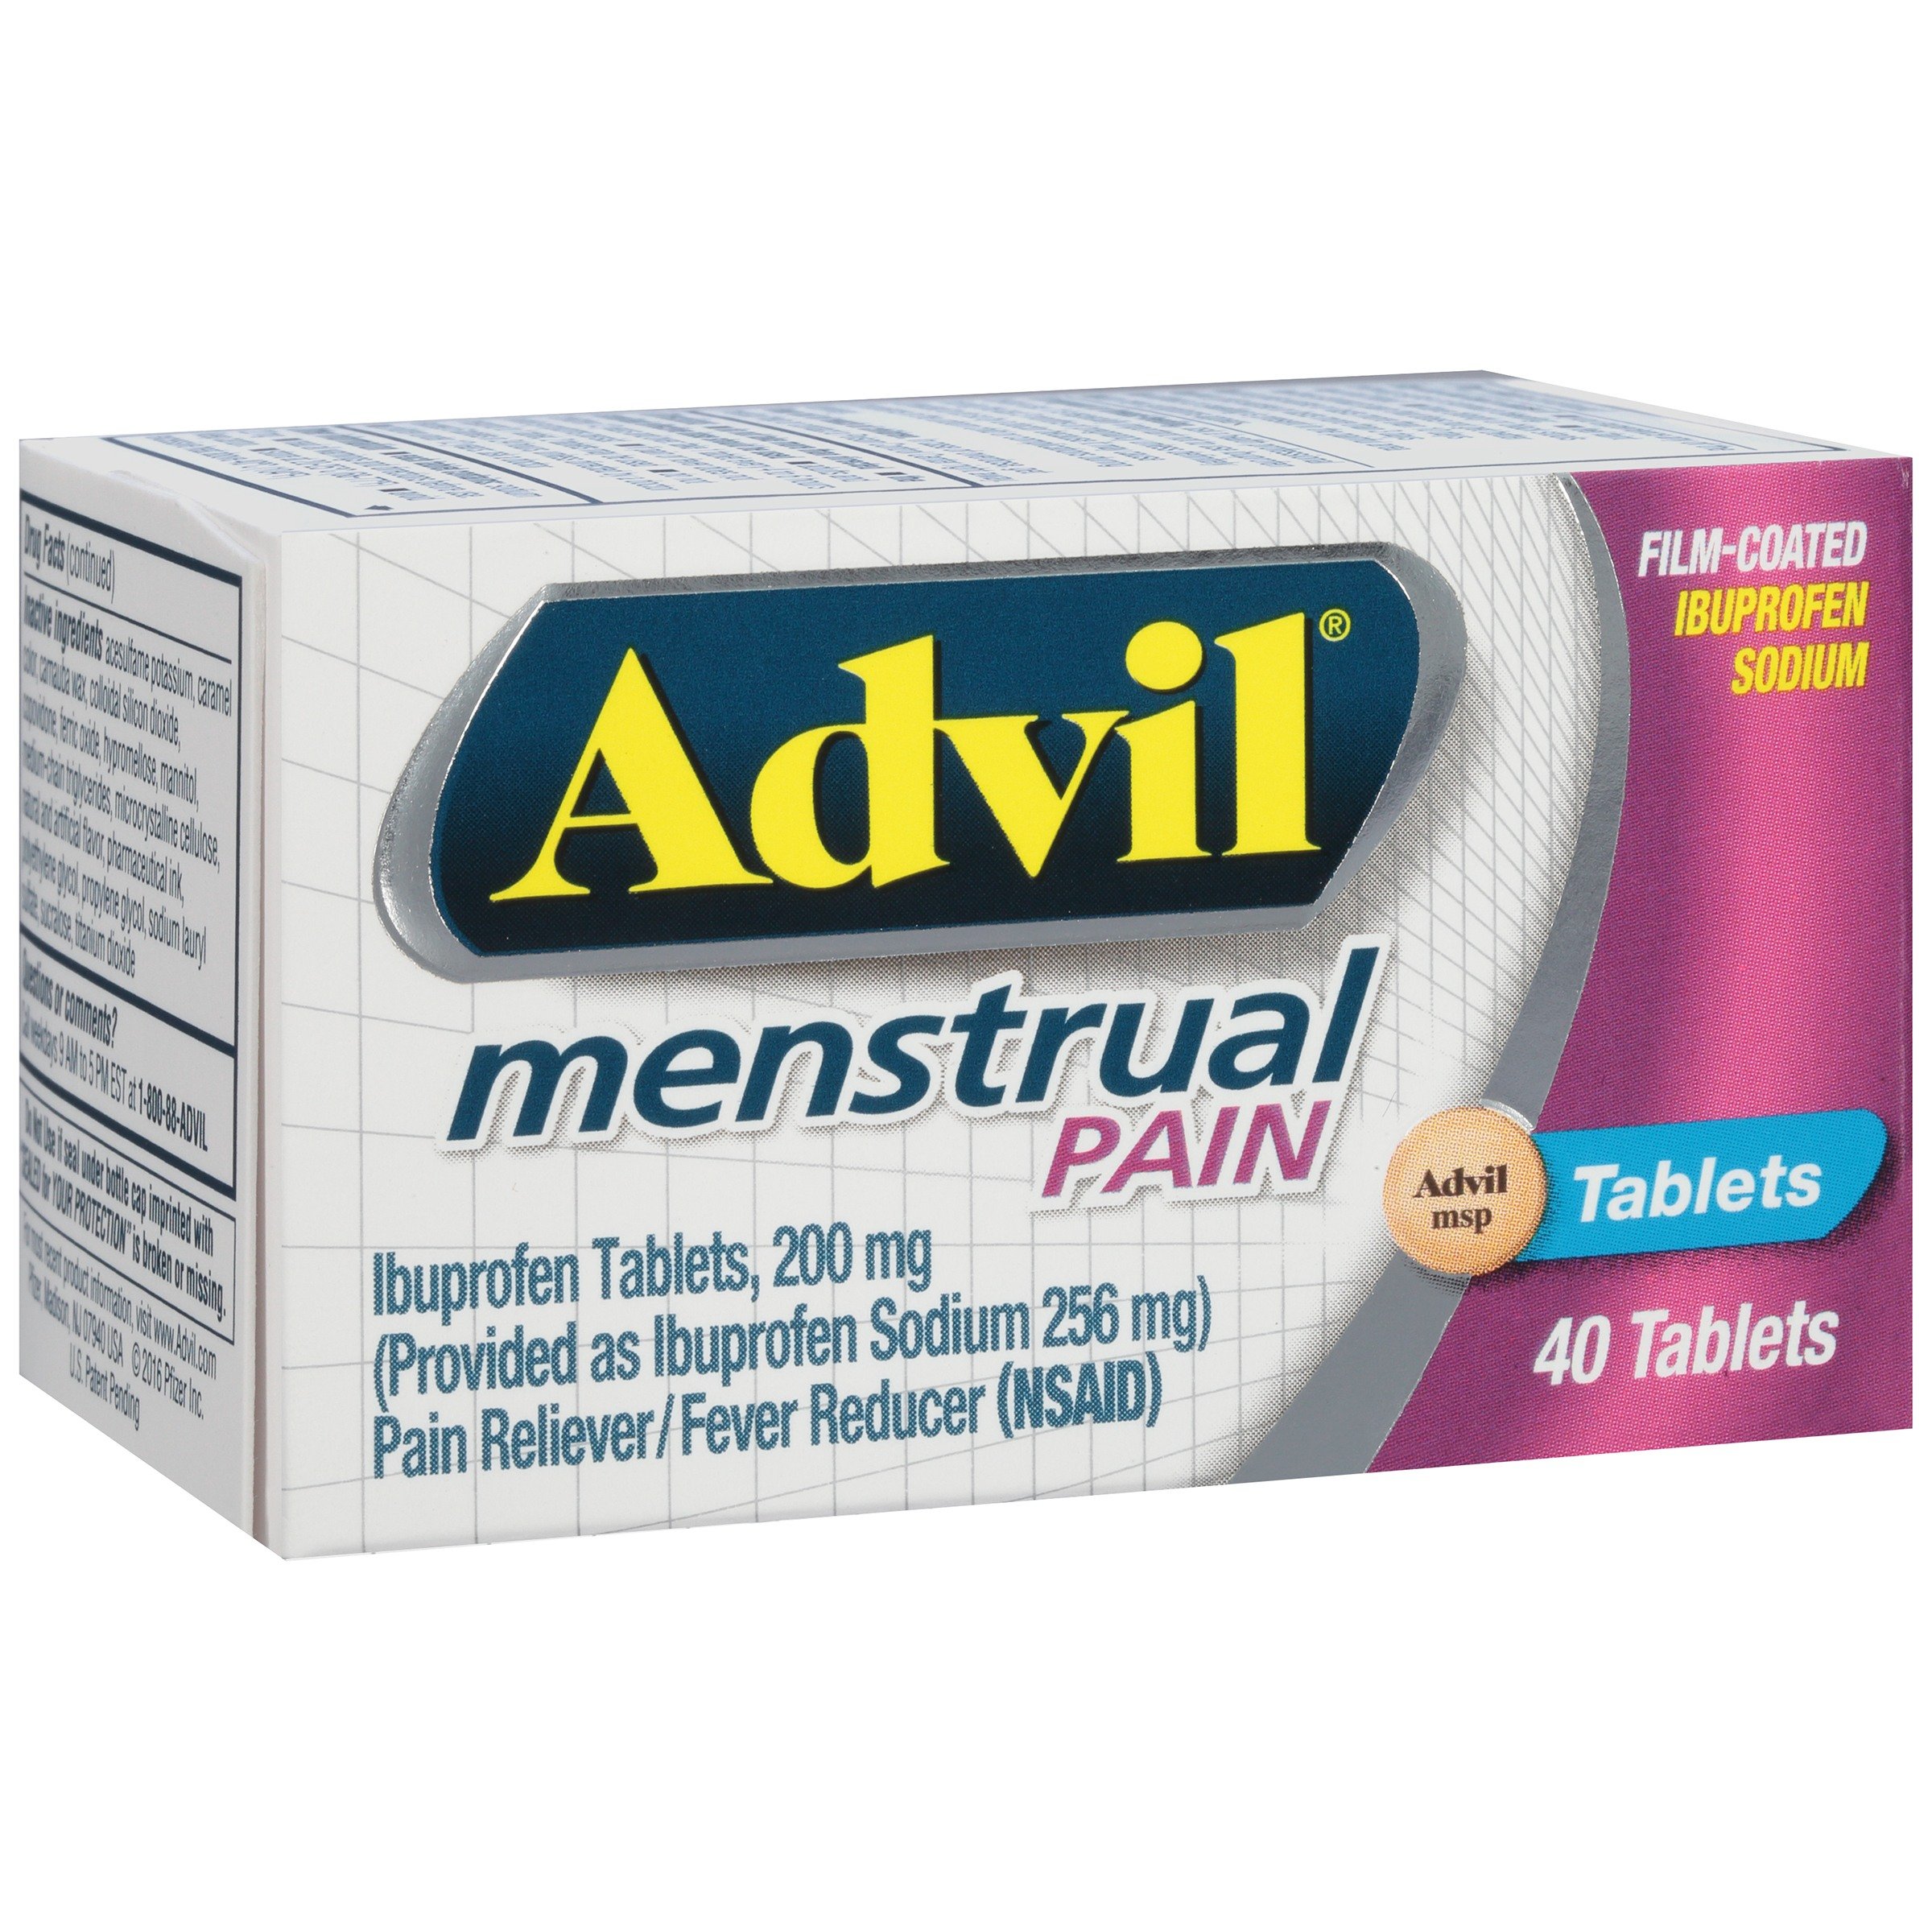 Advil Menstrual 40 Count Pain Reliever / Fever Reducer Tablet, 200mg ...